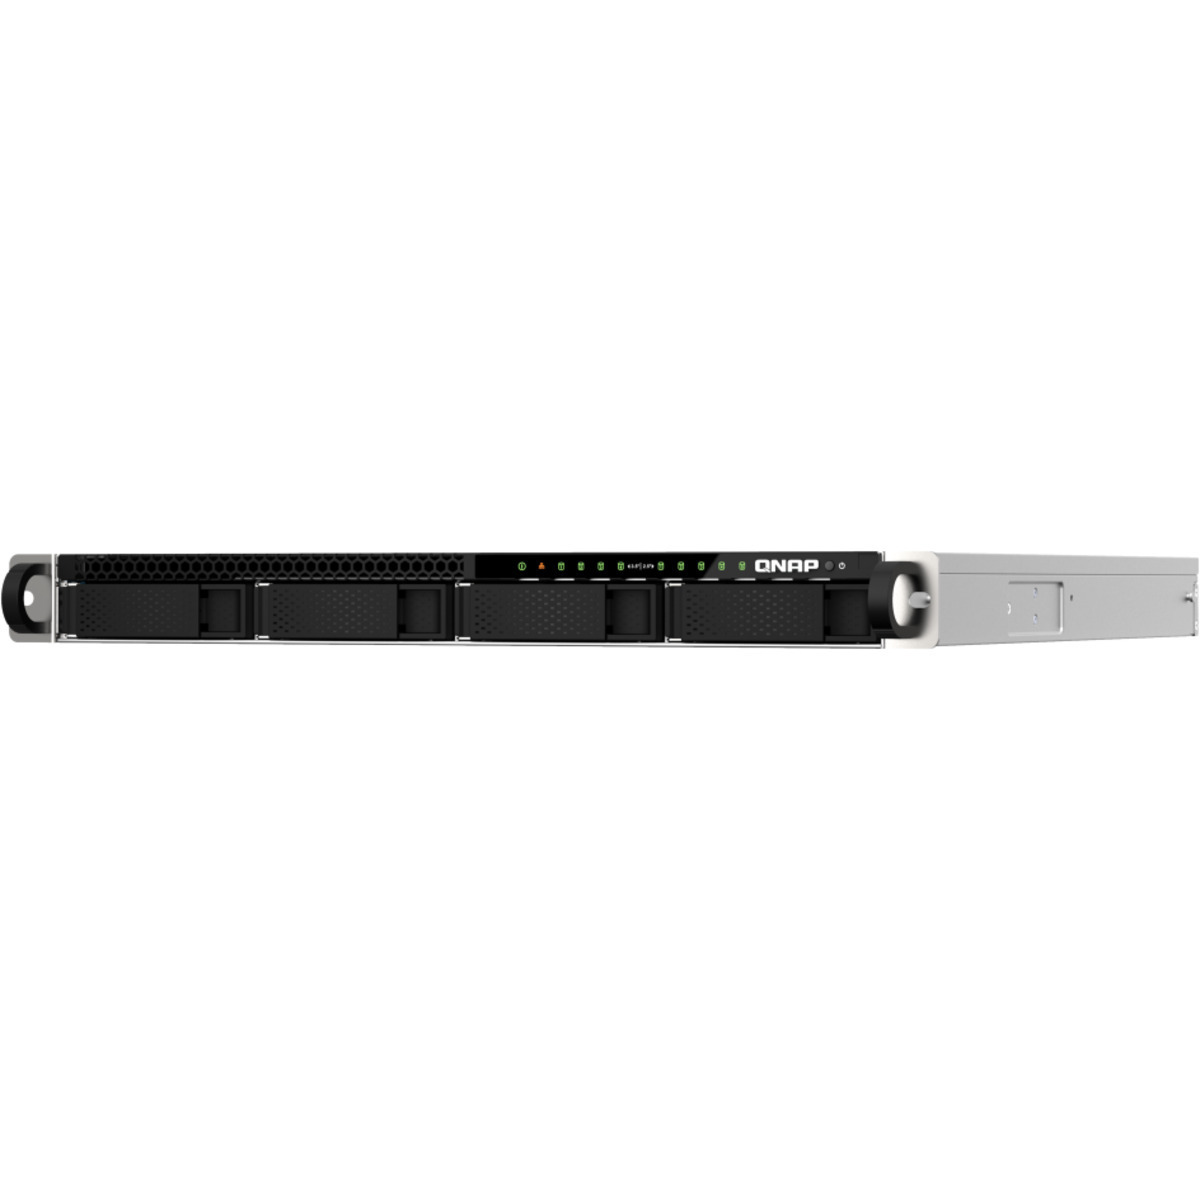 QNAP TS-h987XU-RP QuTS hero Edition 54tb 4-Bay RackMount Large Business / Enterprise NAS - Network Attached Storage Device 3x18tb Western Digital Red Pro WD181KFGX 3.5 7200rpm SATA 6Gb/s HDD NAS Class Drives Installed - Burn-In Tested TS-h987XU-RP QuTS hero Edition